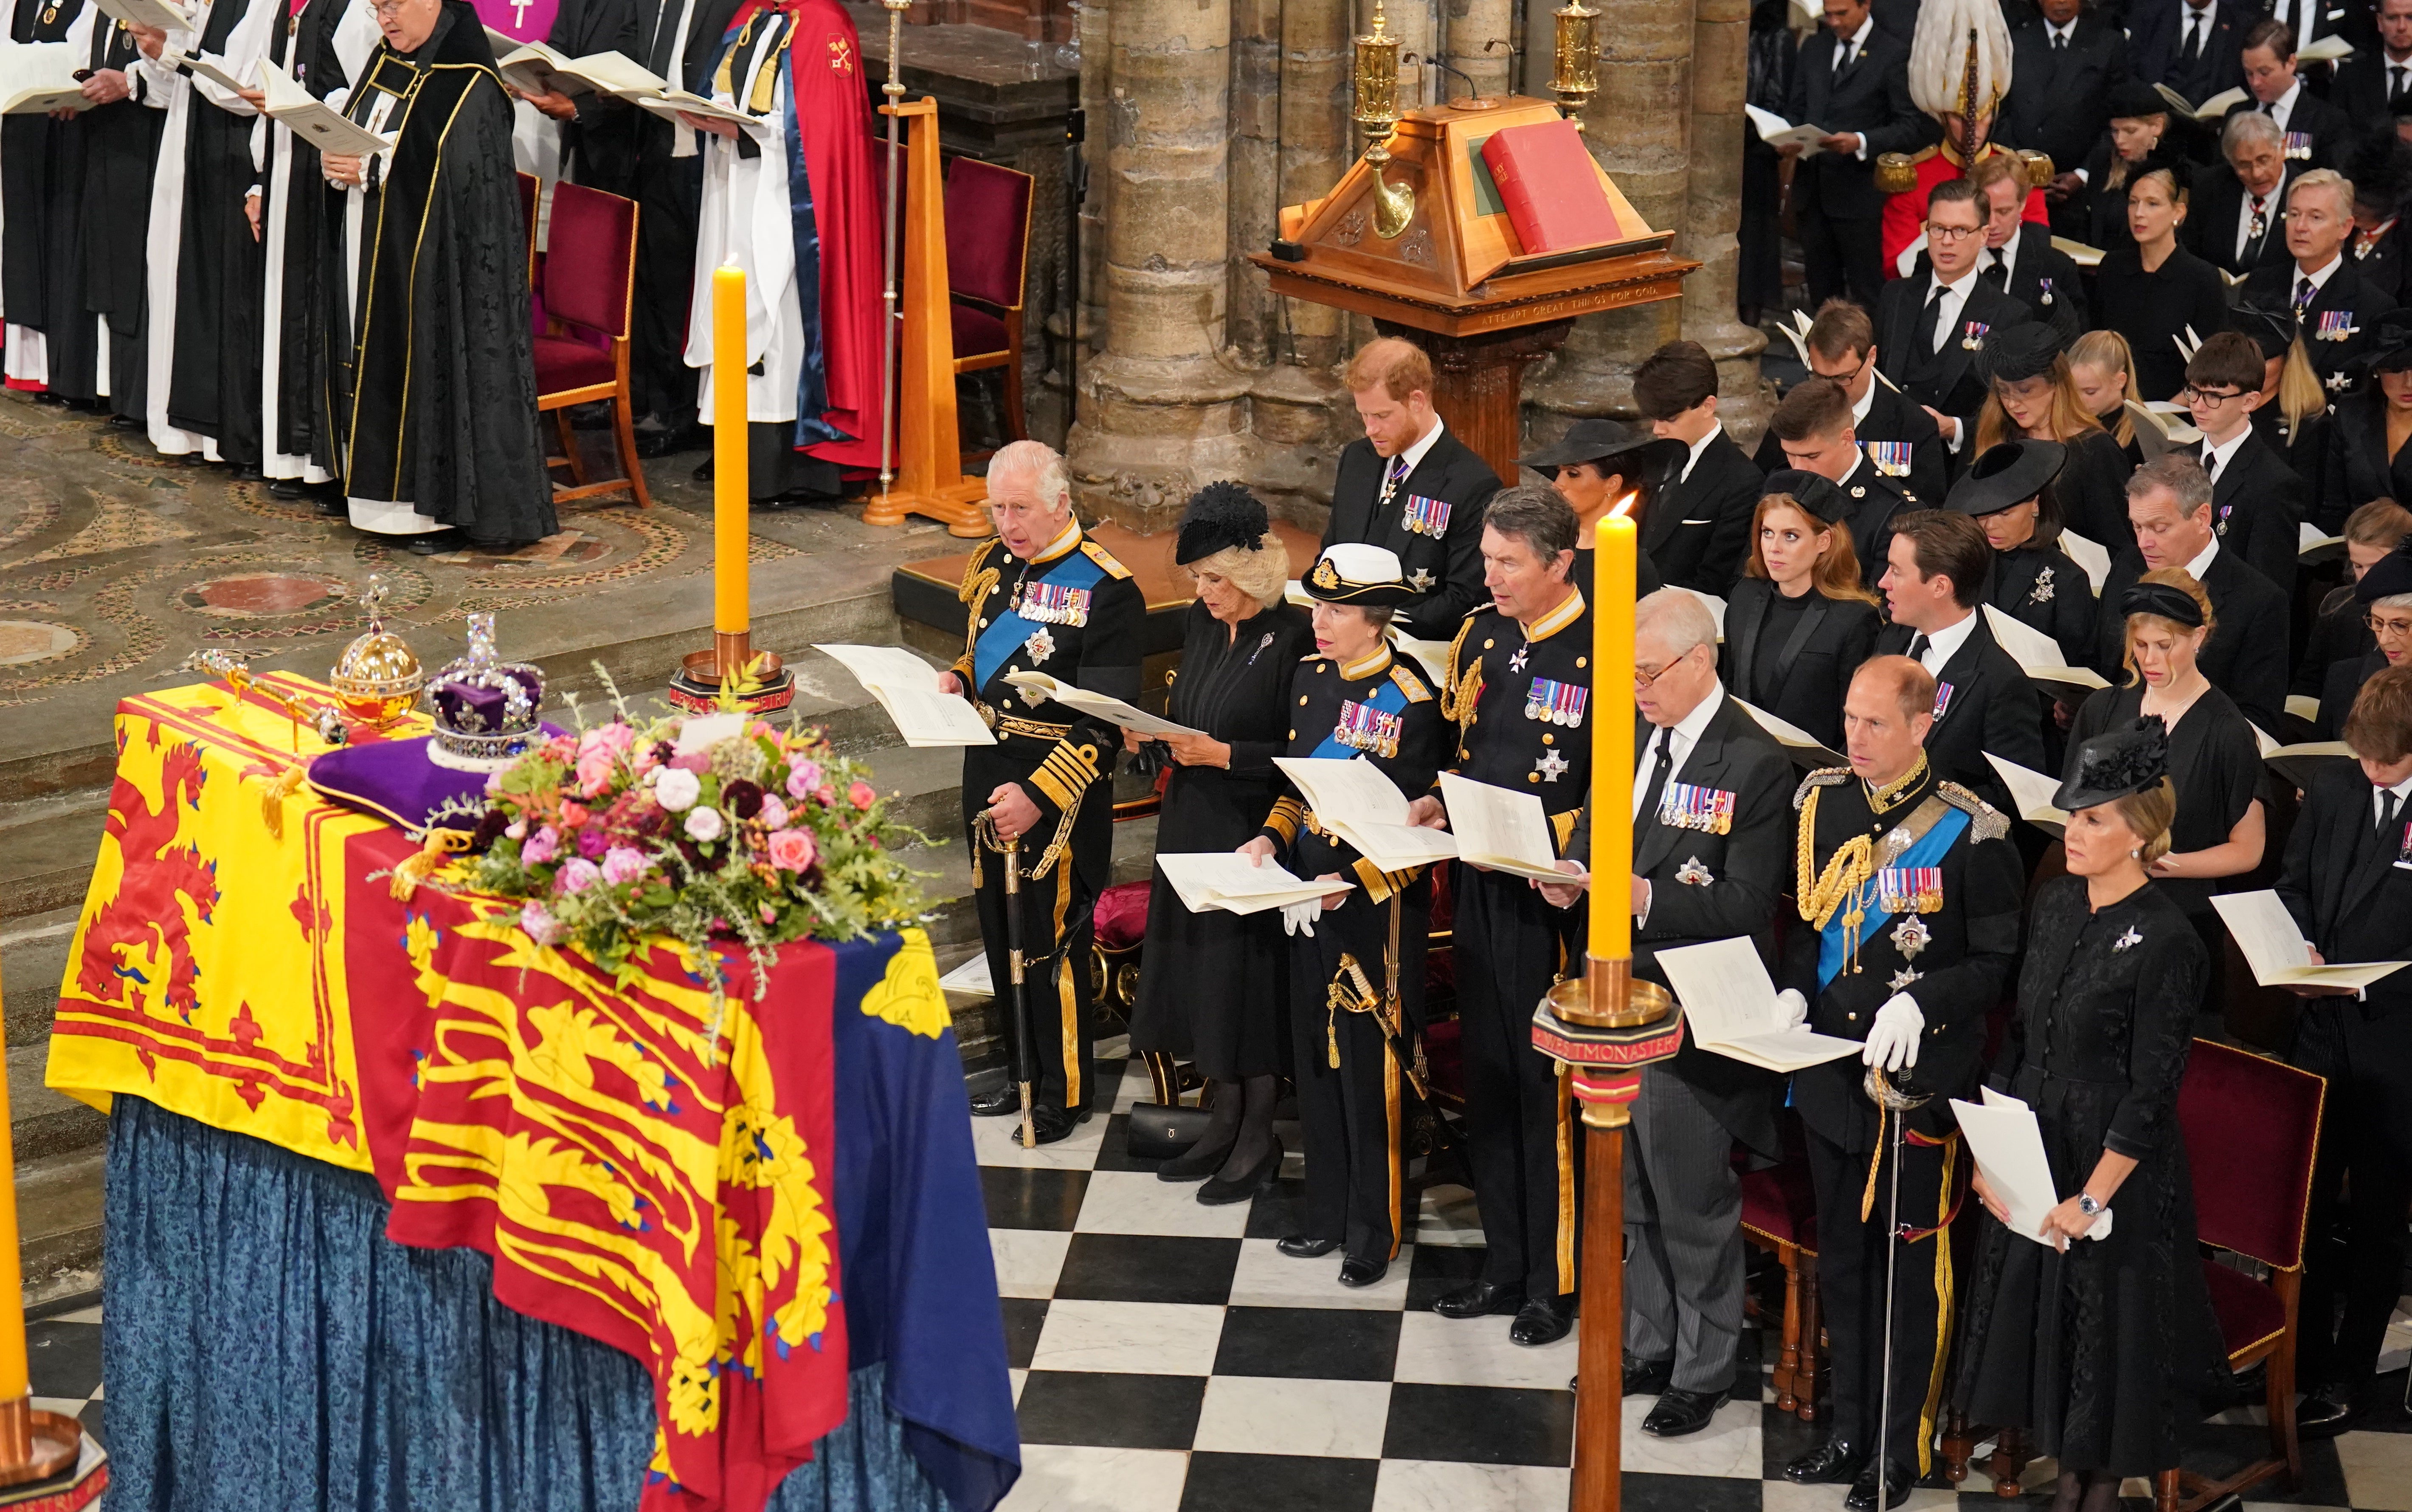 The royal family during the Queen’s state funeral at Westminster Abbey